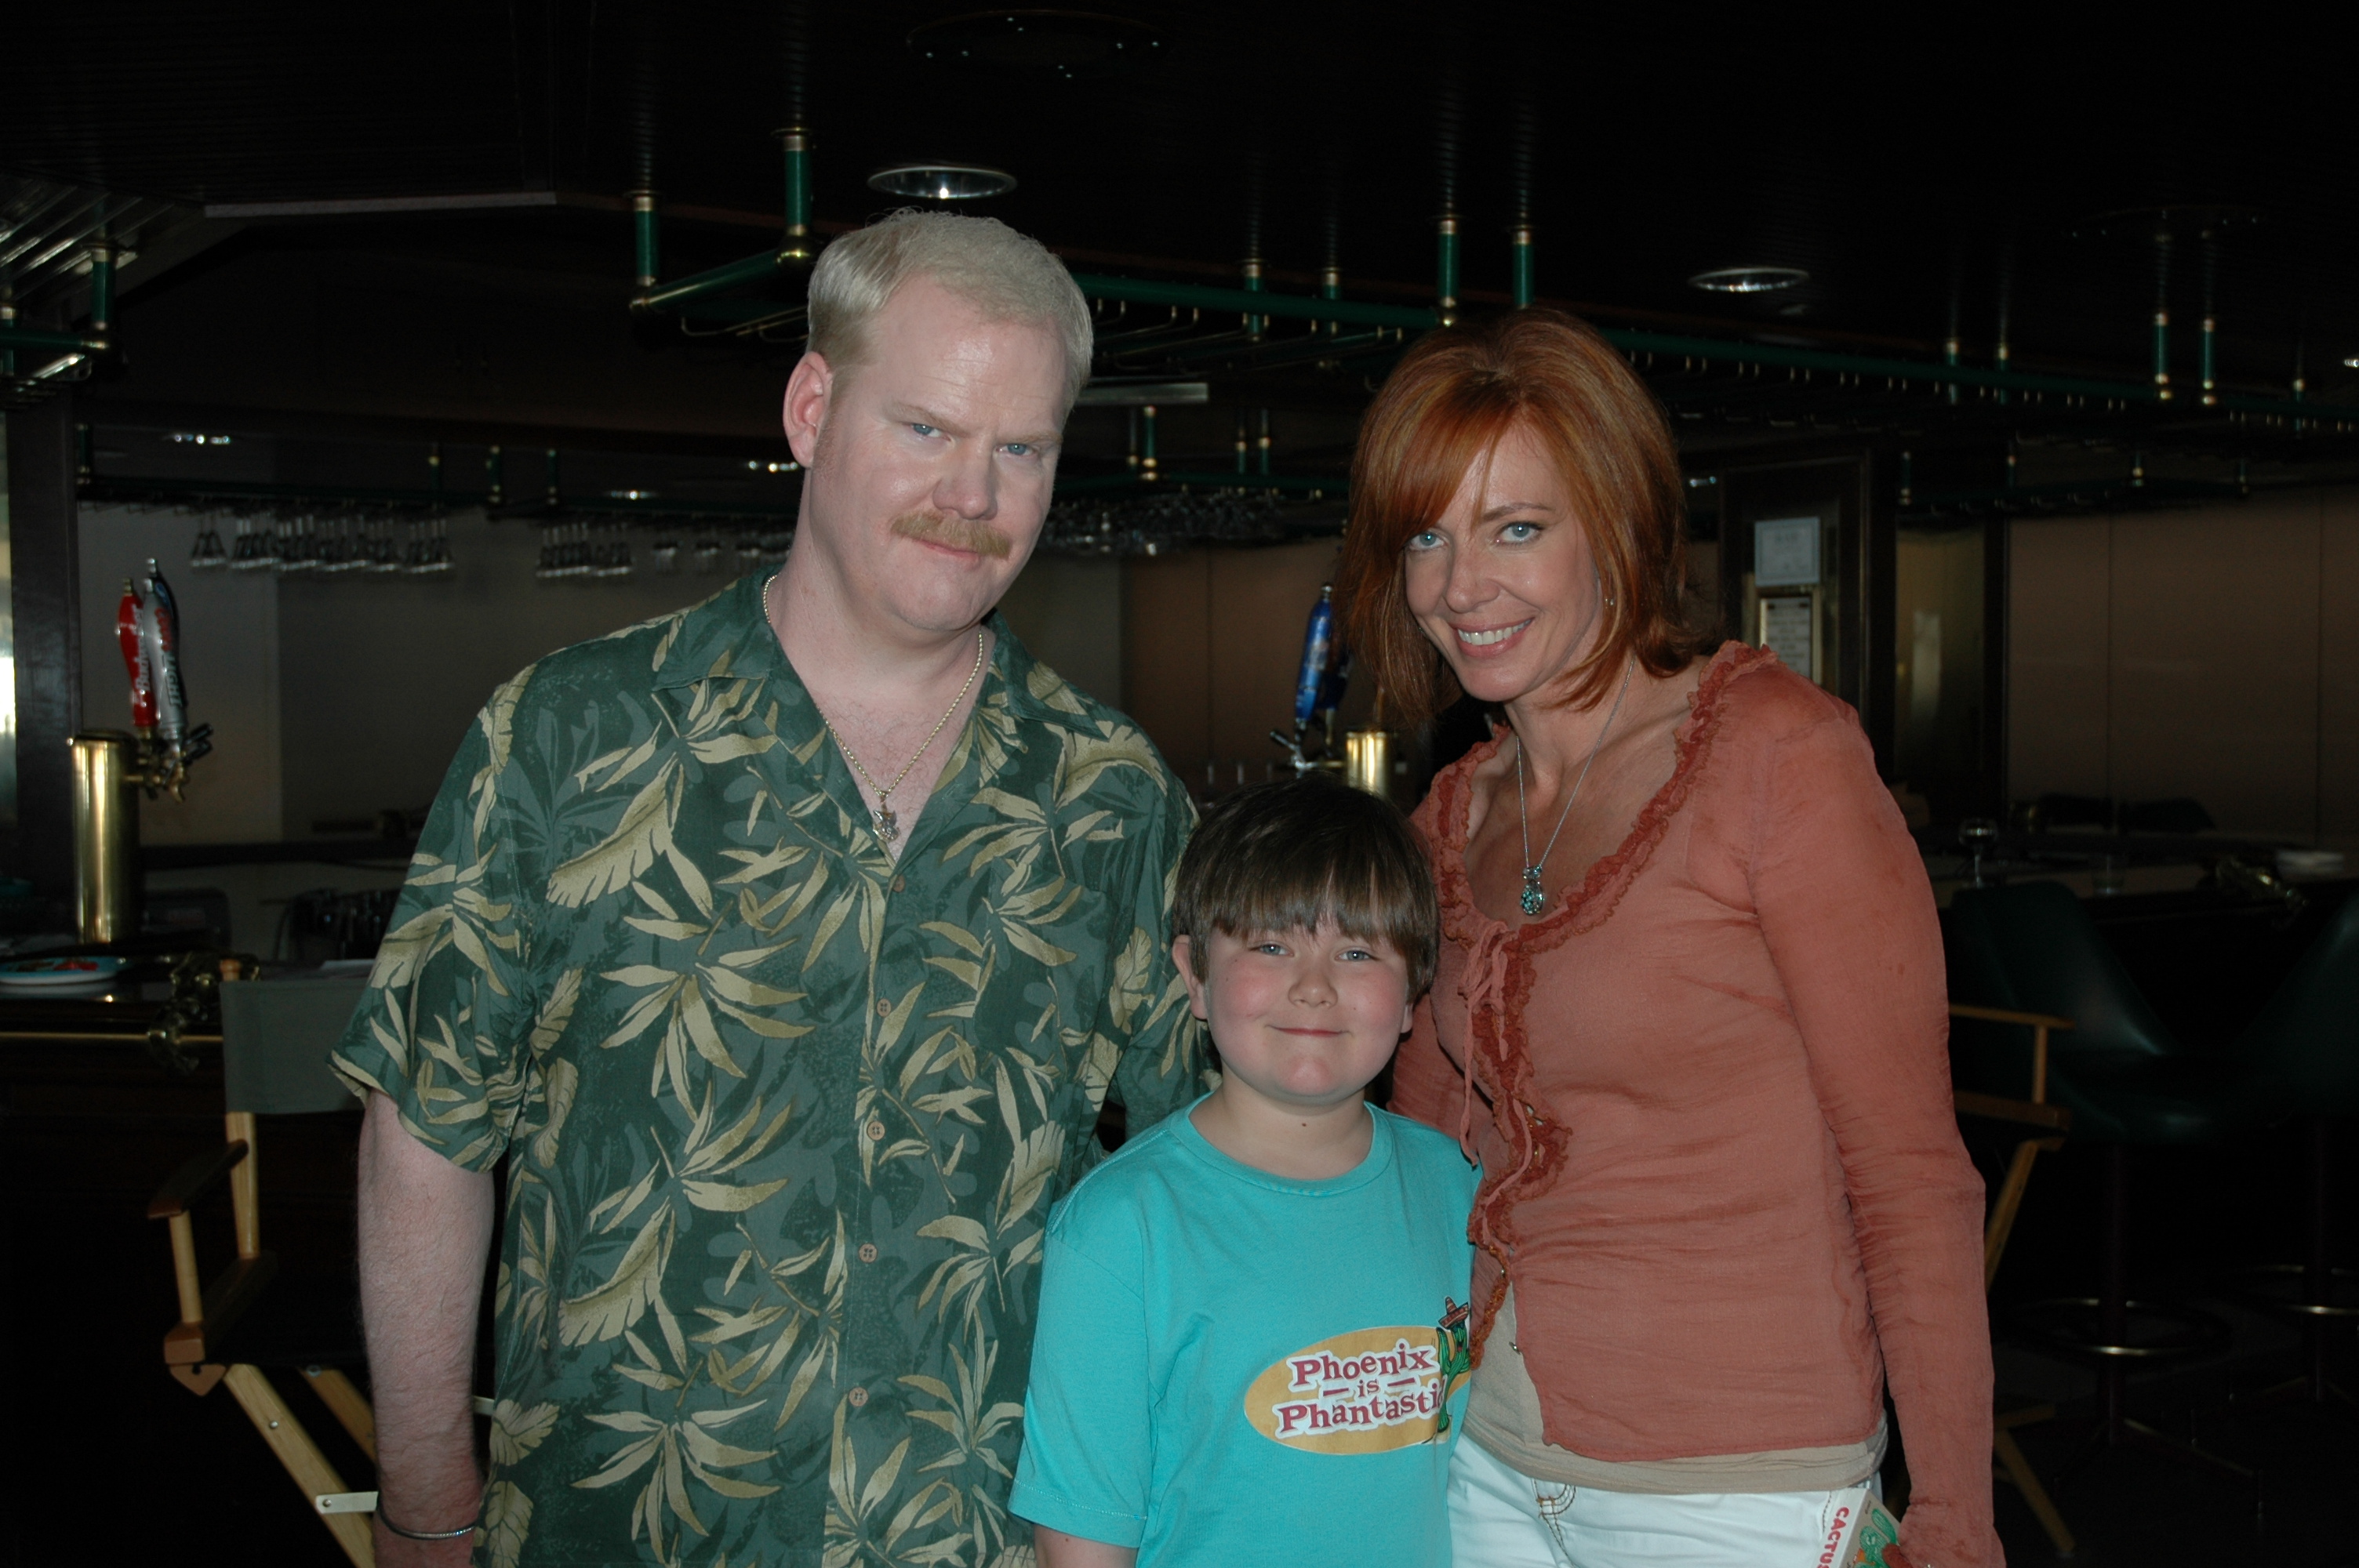 Jim Gaffigan, Conor Carroll, and Allison Janney, from 